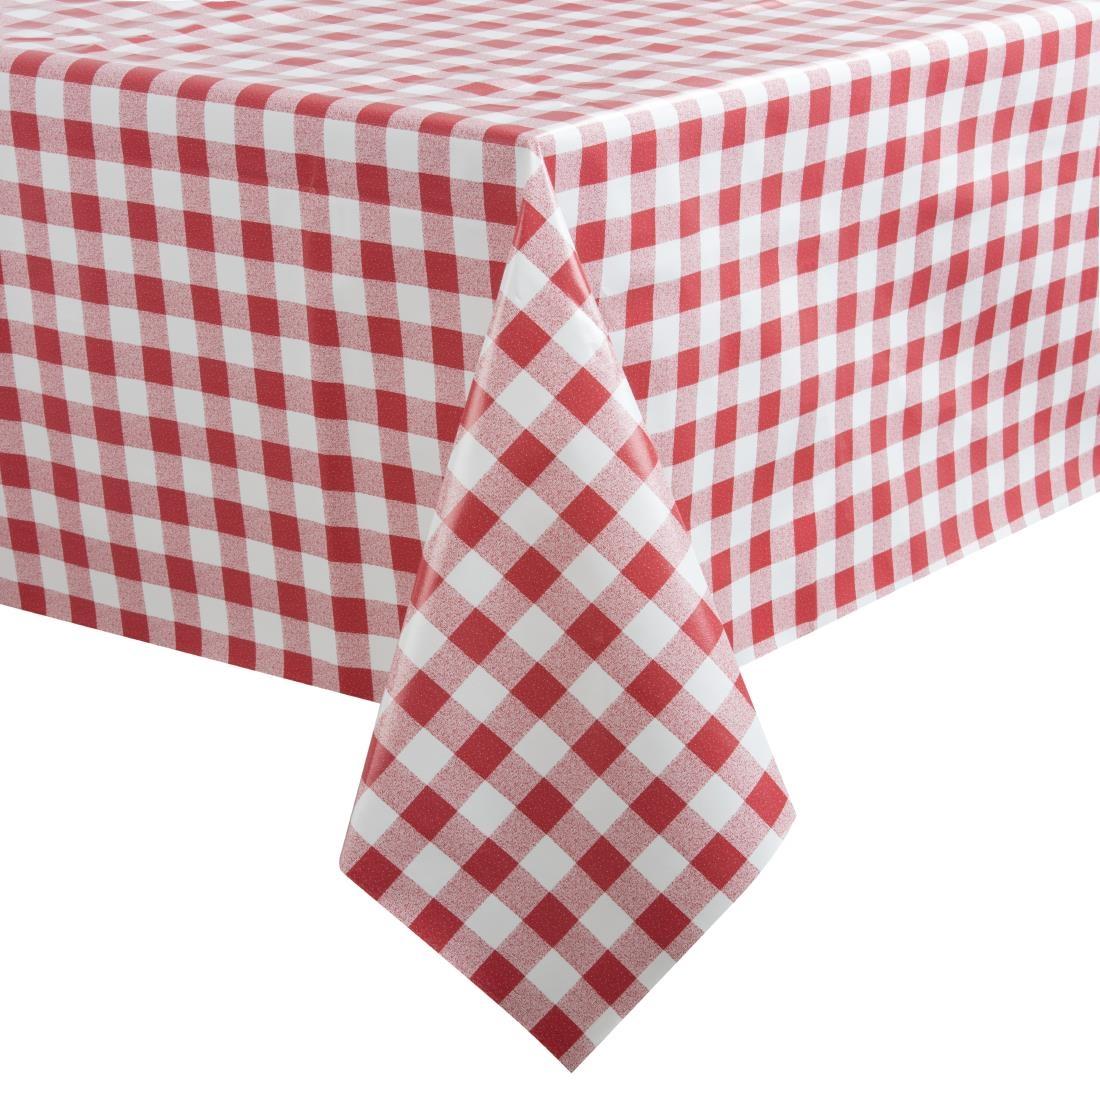 PVC Chequered Tablecloth Red 54 x90in - E795  - 1